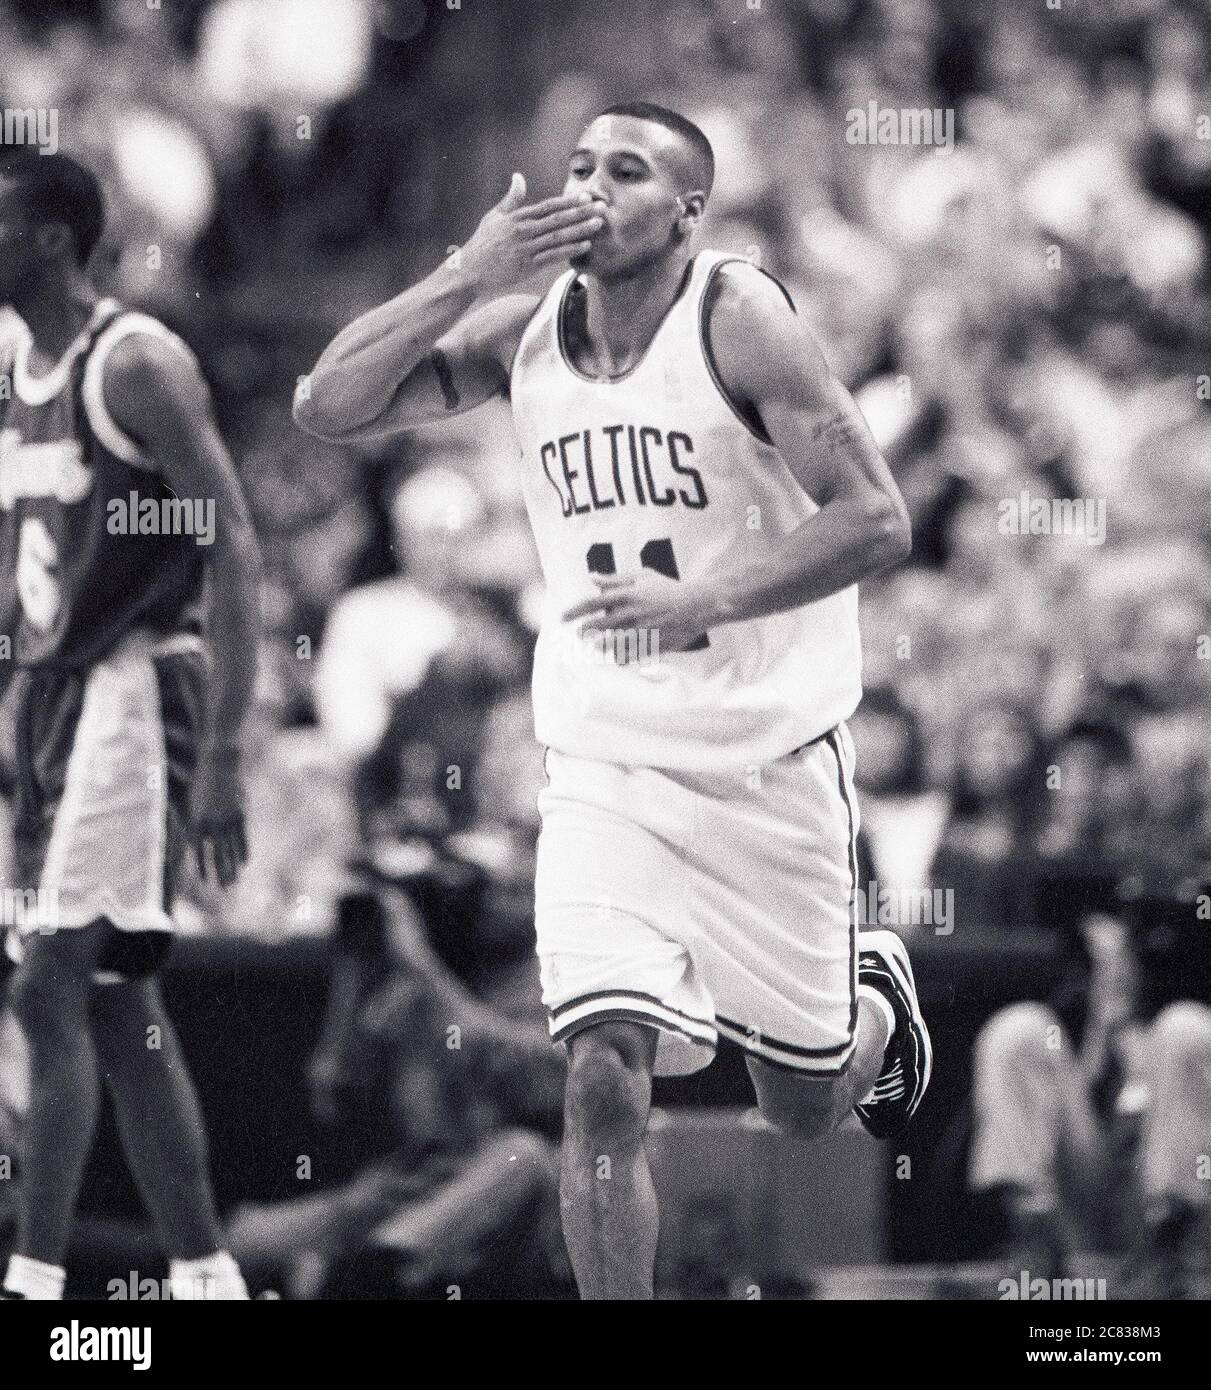 Boston Celtics Dana Barros #11 sends a kiss after scoring a three pointer against the LA Lakers in basketball game action at the Fleet Center in Boston Ma USA ,1996-97 season photo by Bill Belknap Stock Photo